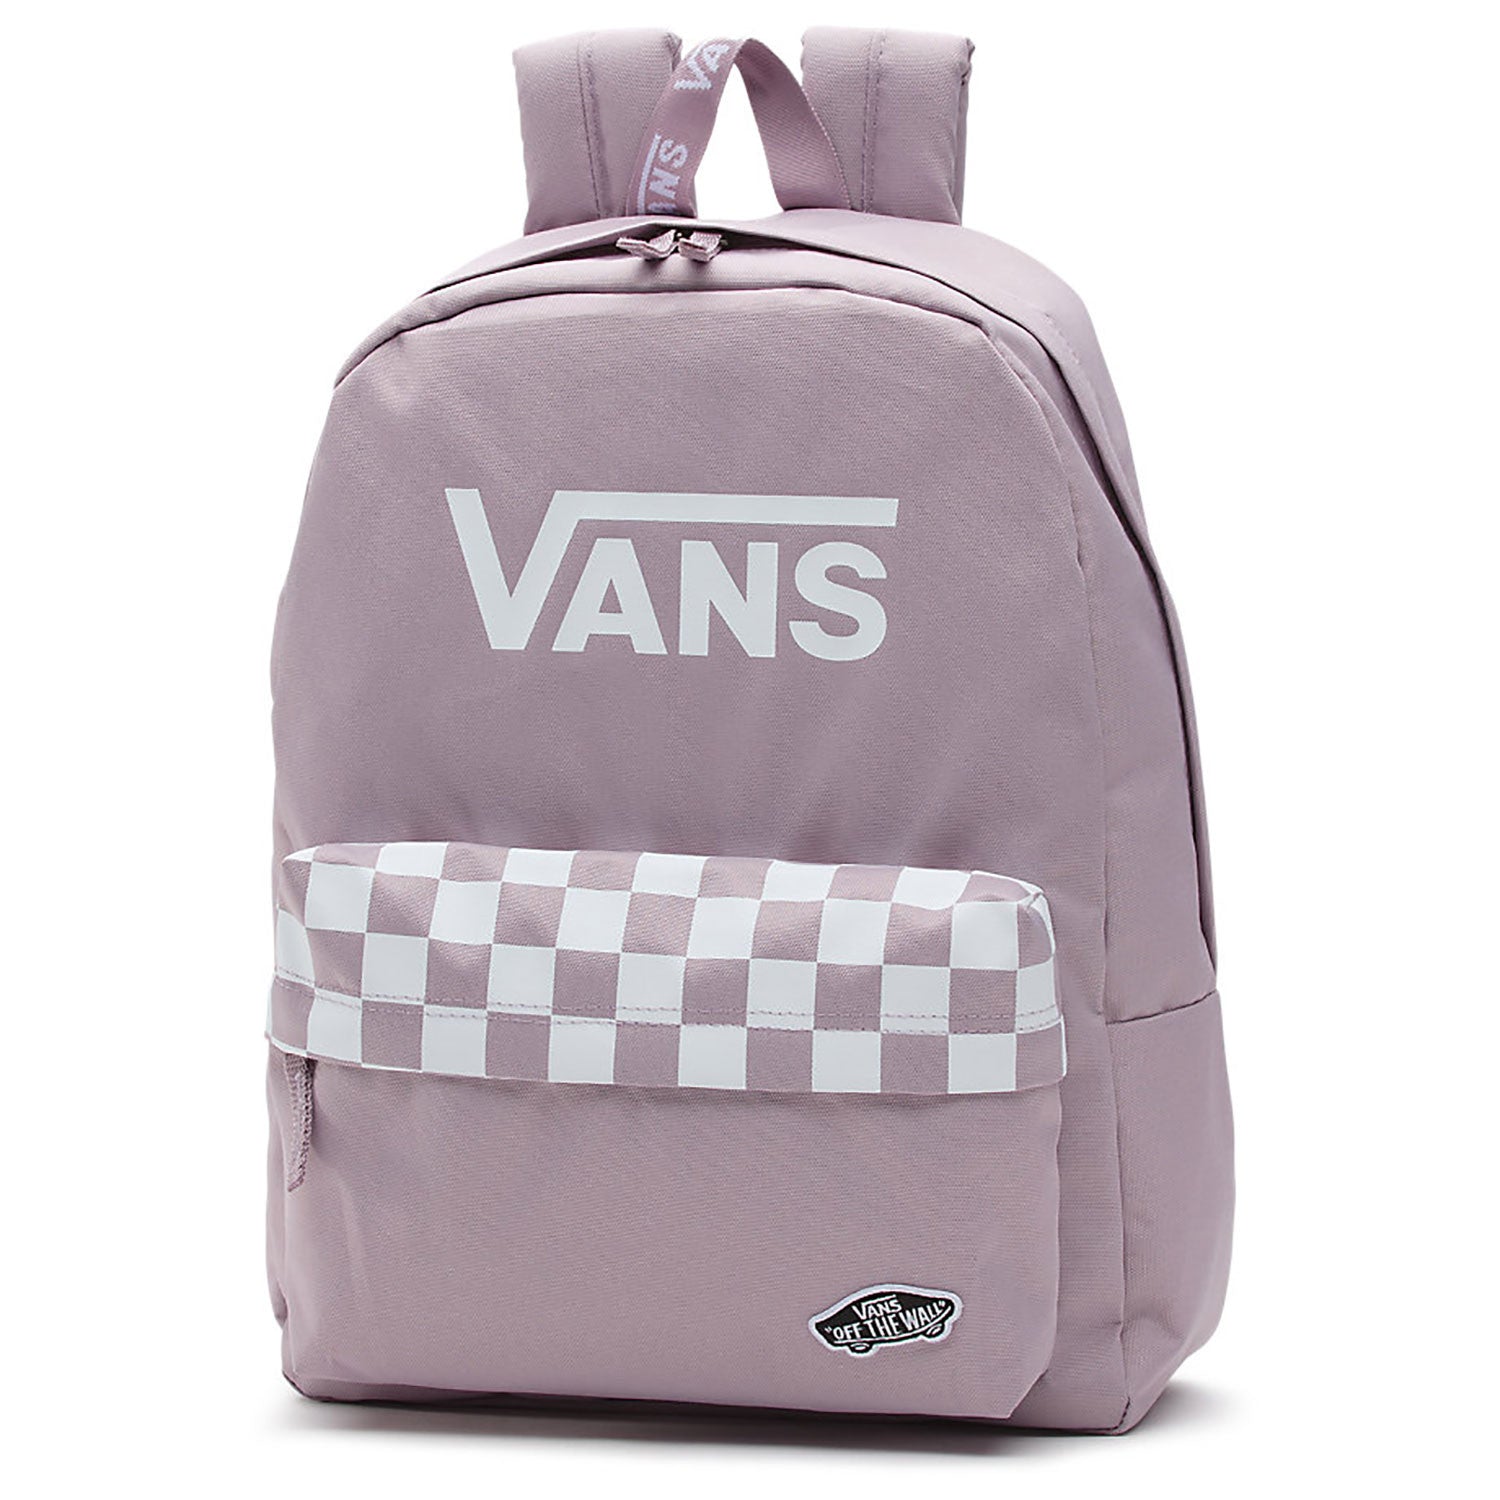 good sporty realm backpack